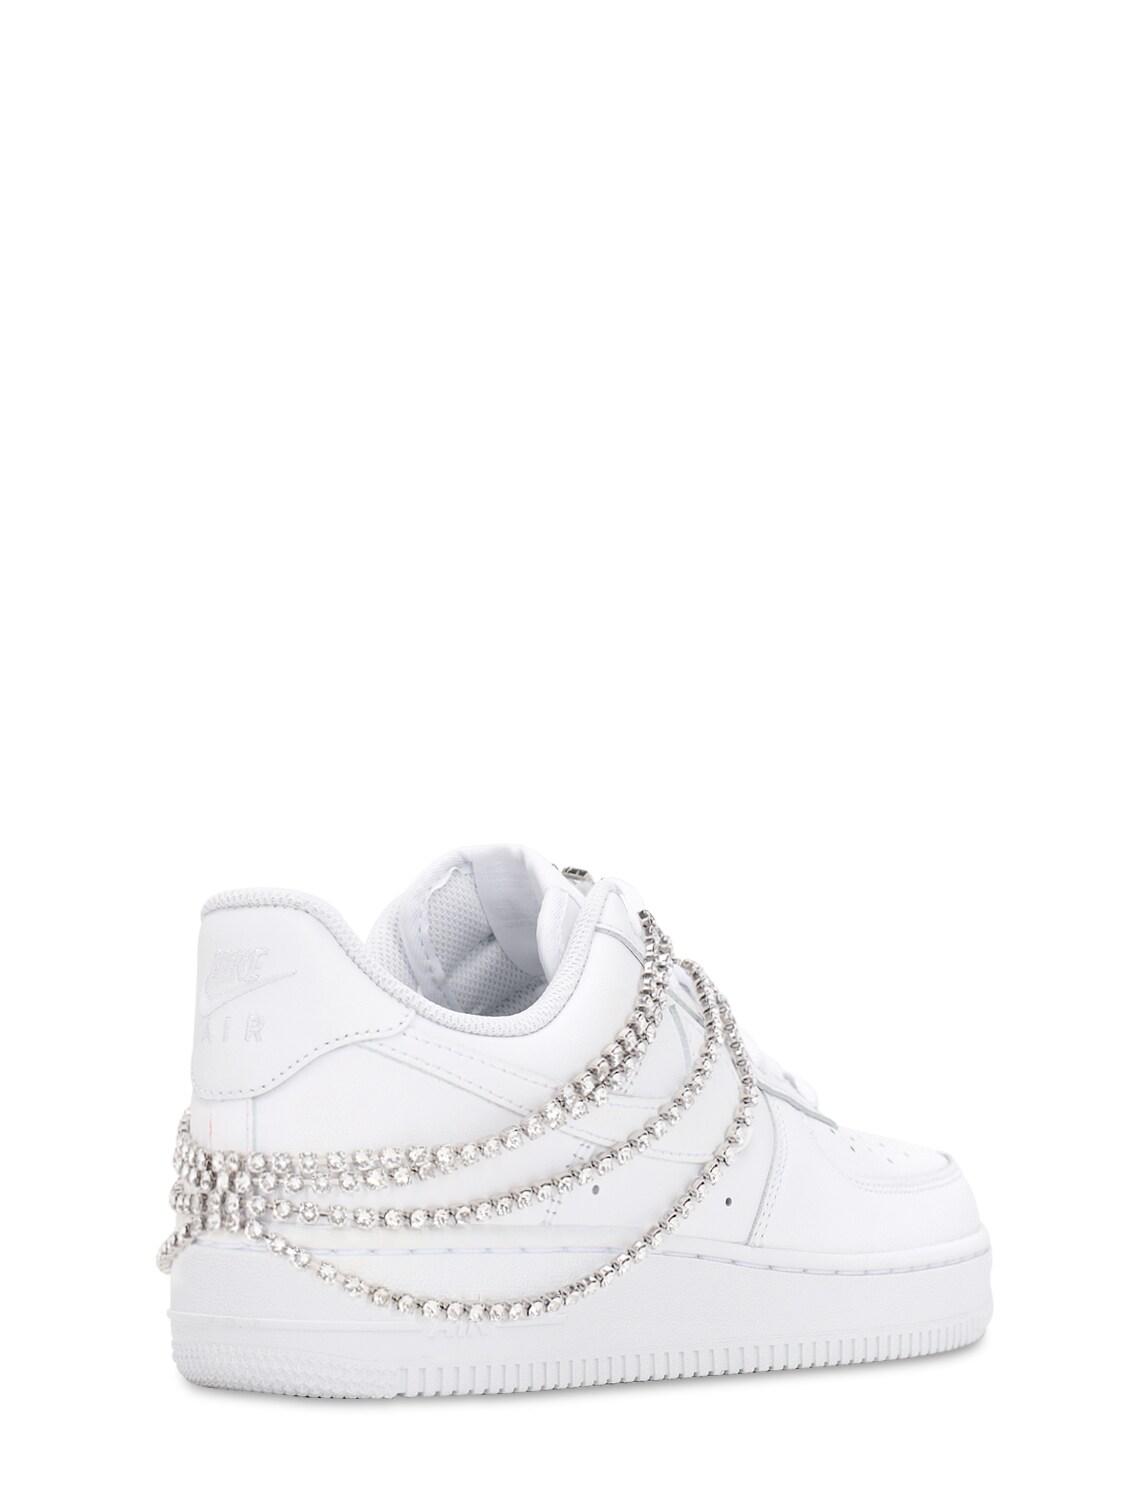 Nike Exclusive Air Force 1 Bridal Sneakers in White | Lyst Canada